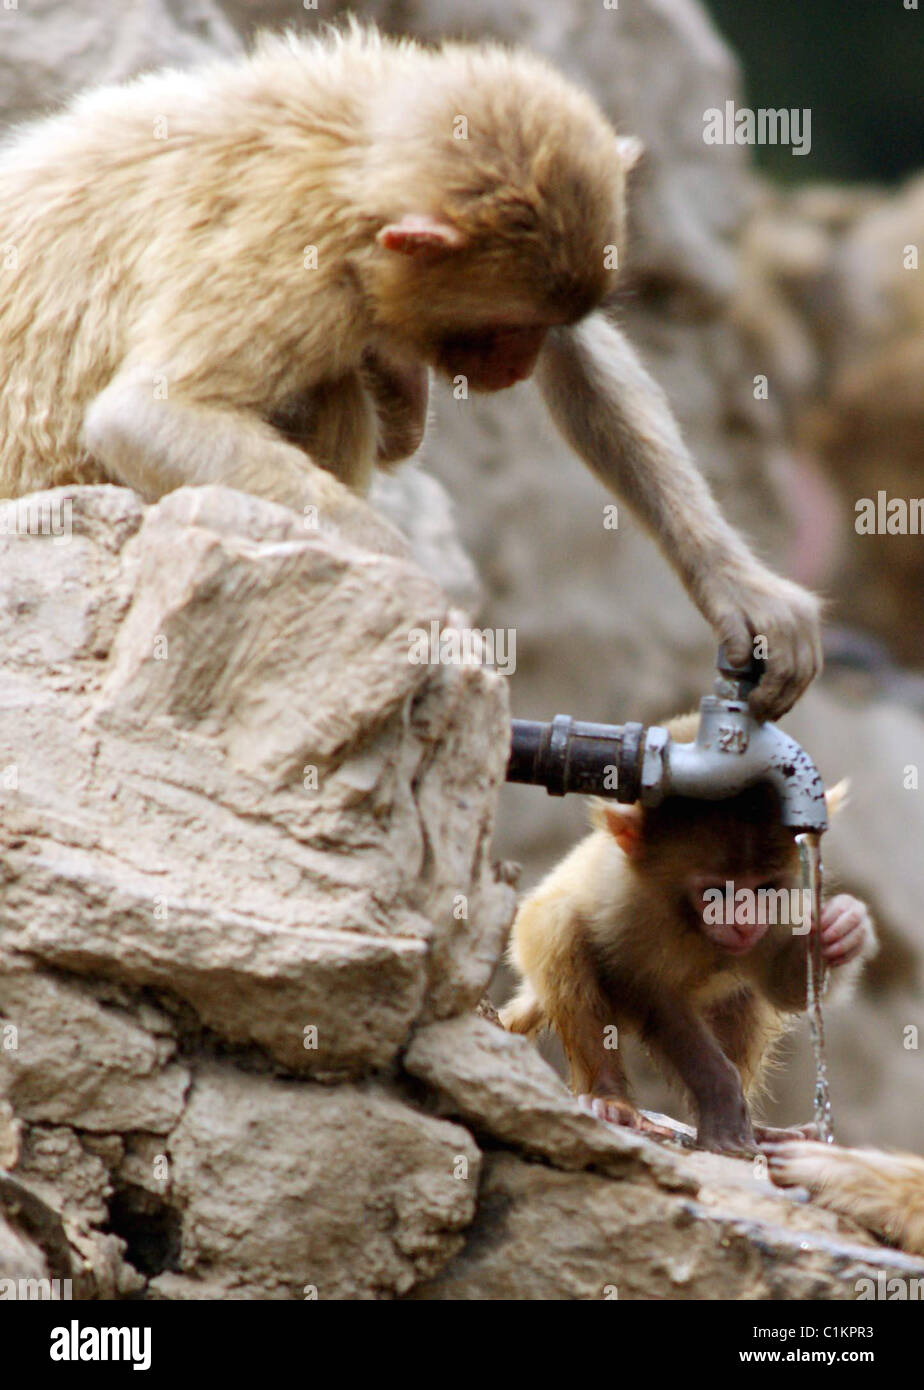 Monkeys beat the heat These clever monkeys have worked out how to stay cool in the oppressive heat in Zhengzhou zoo, China. Stock Photo